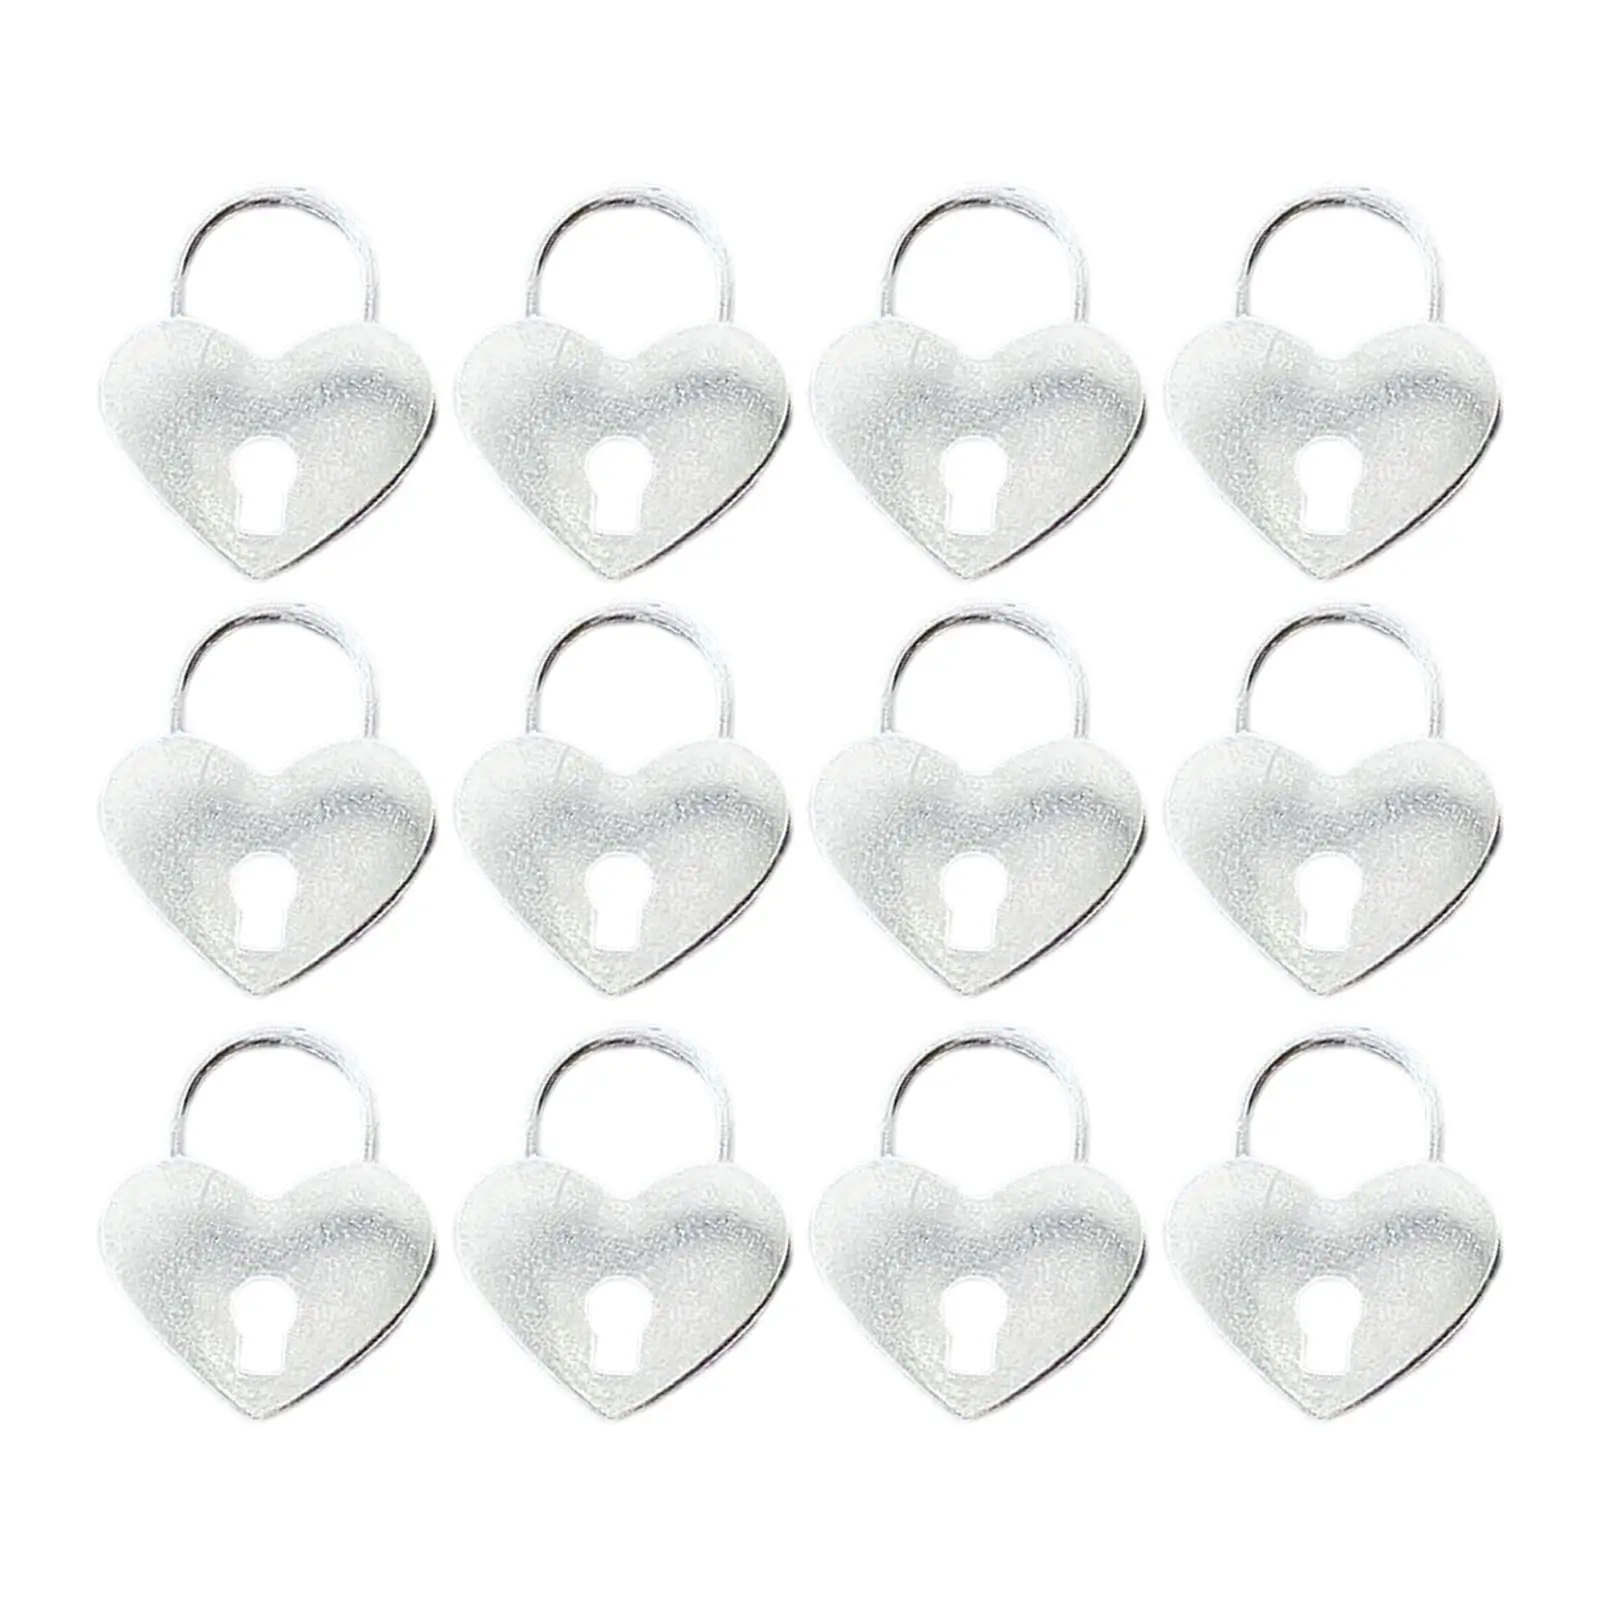 Modern Heart Lock Charms Love Lock Pattern Pendant for Keychain Accessories